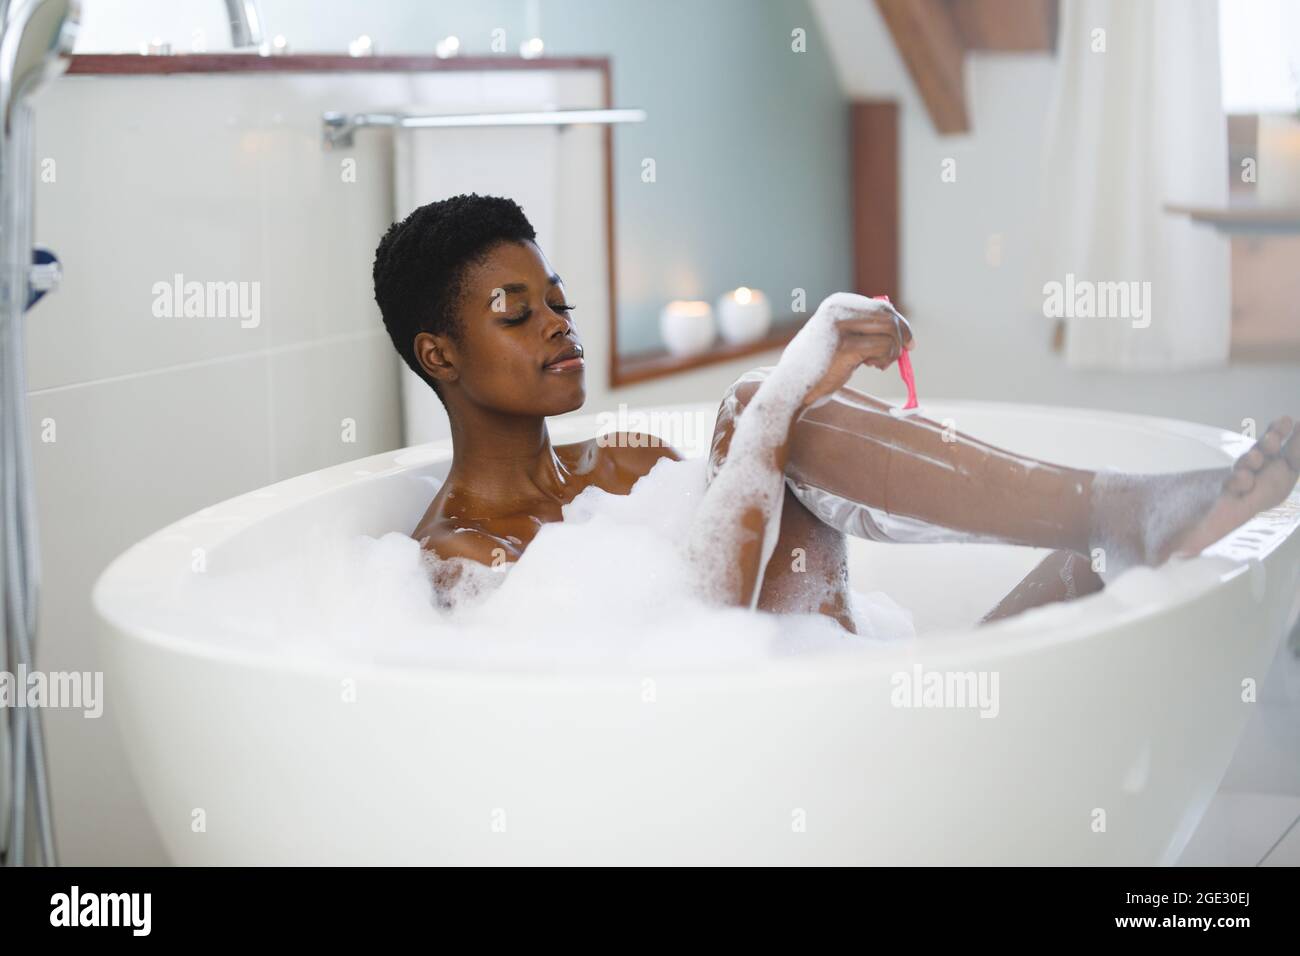 Smiling african american woman having foam bath and shaving her legs Stock Photo